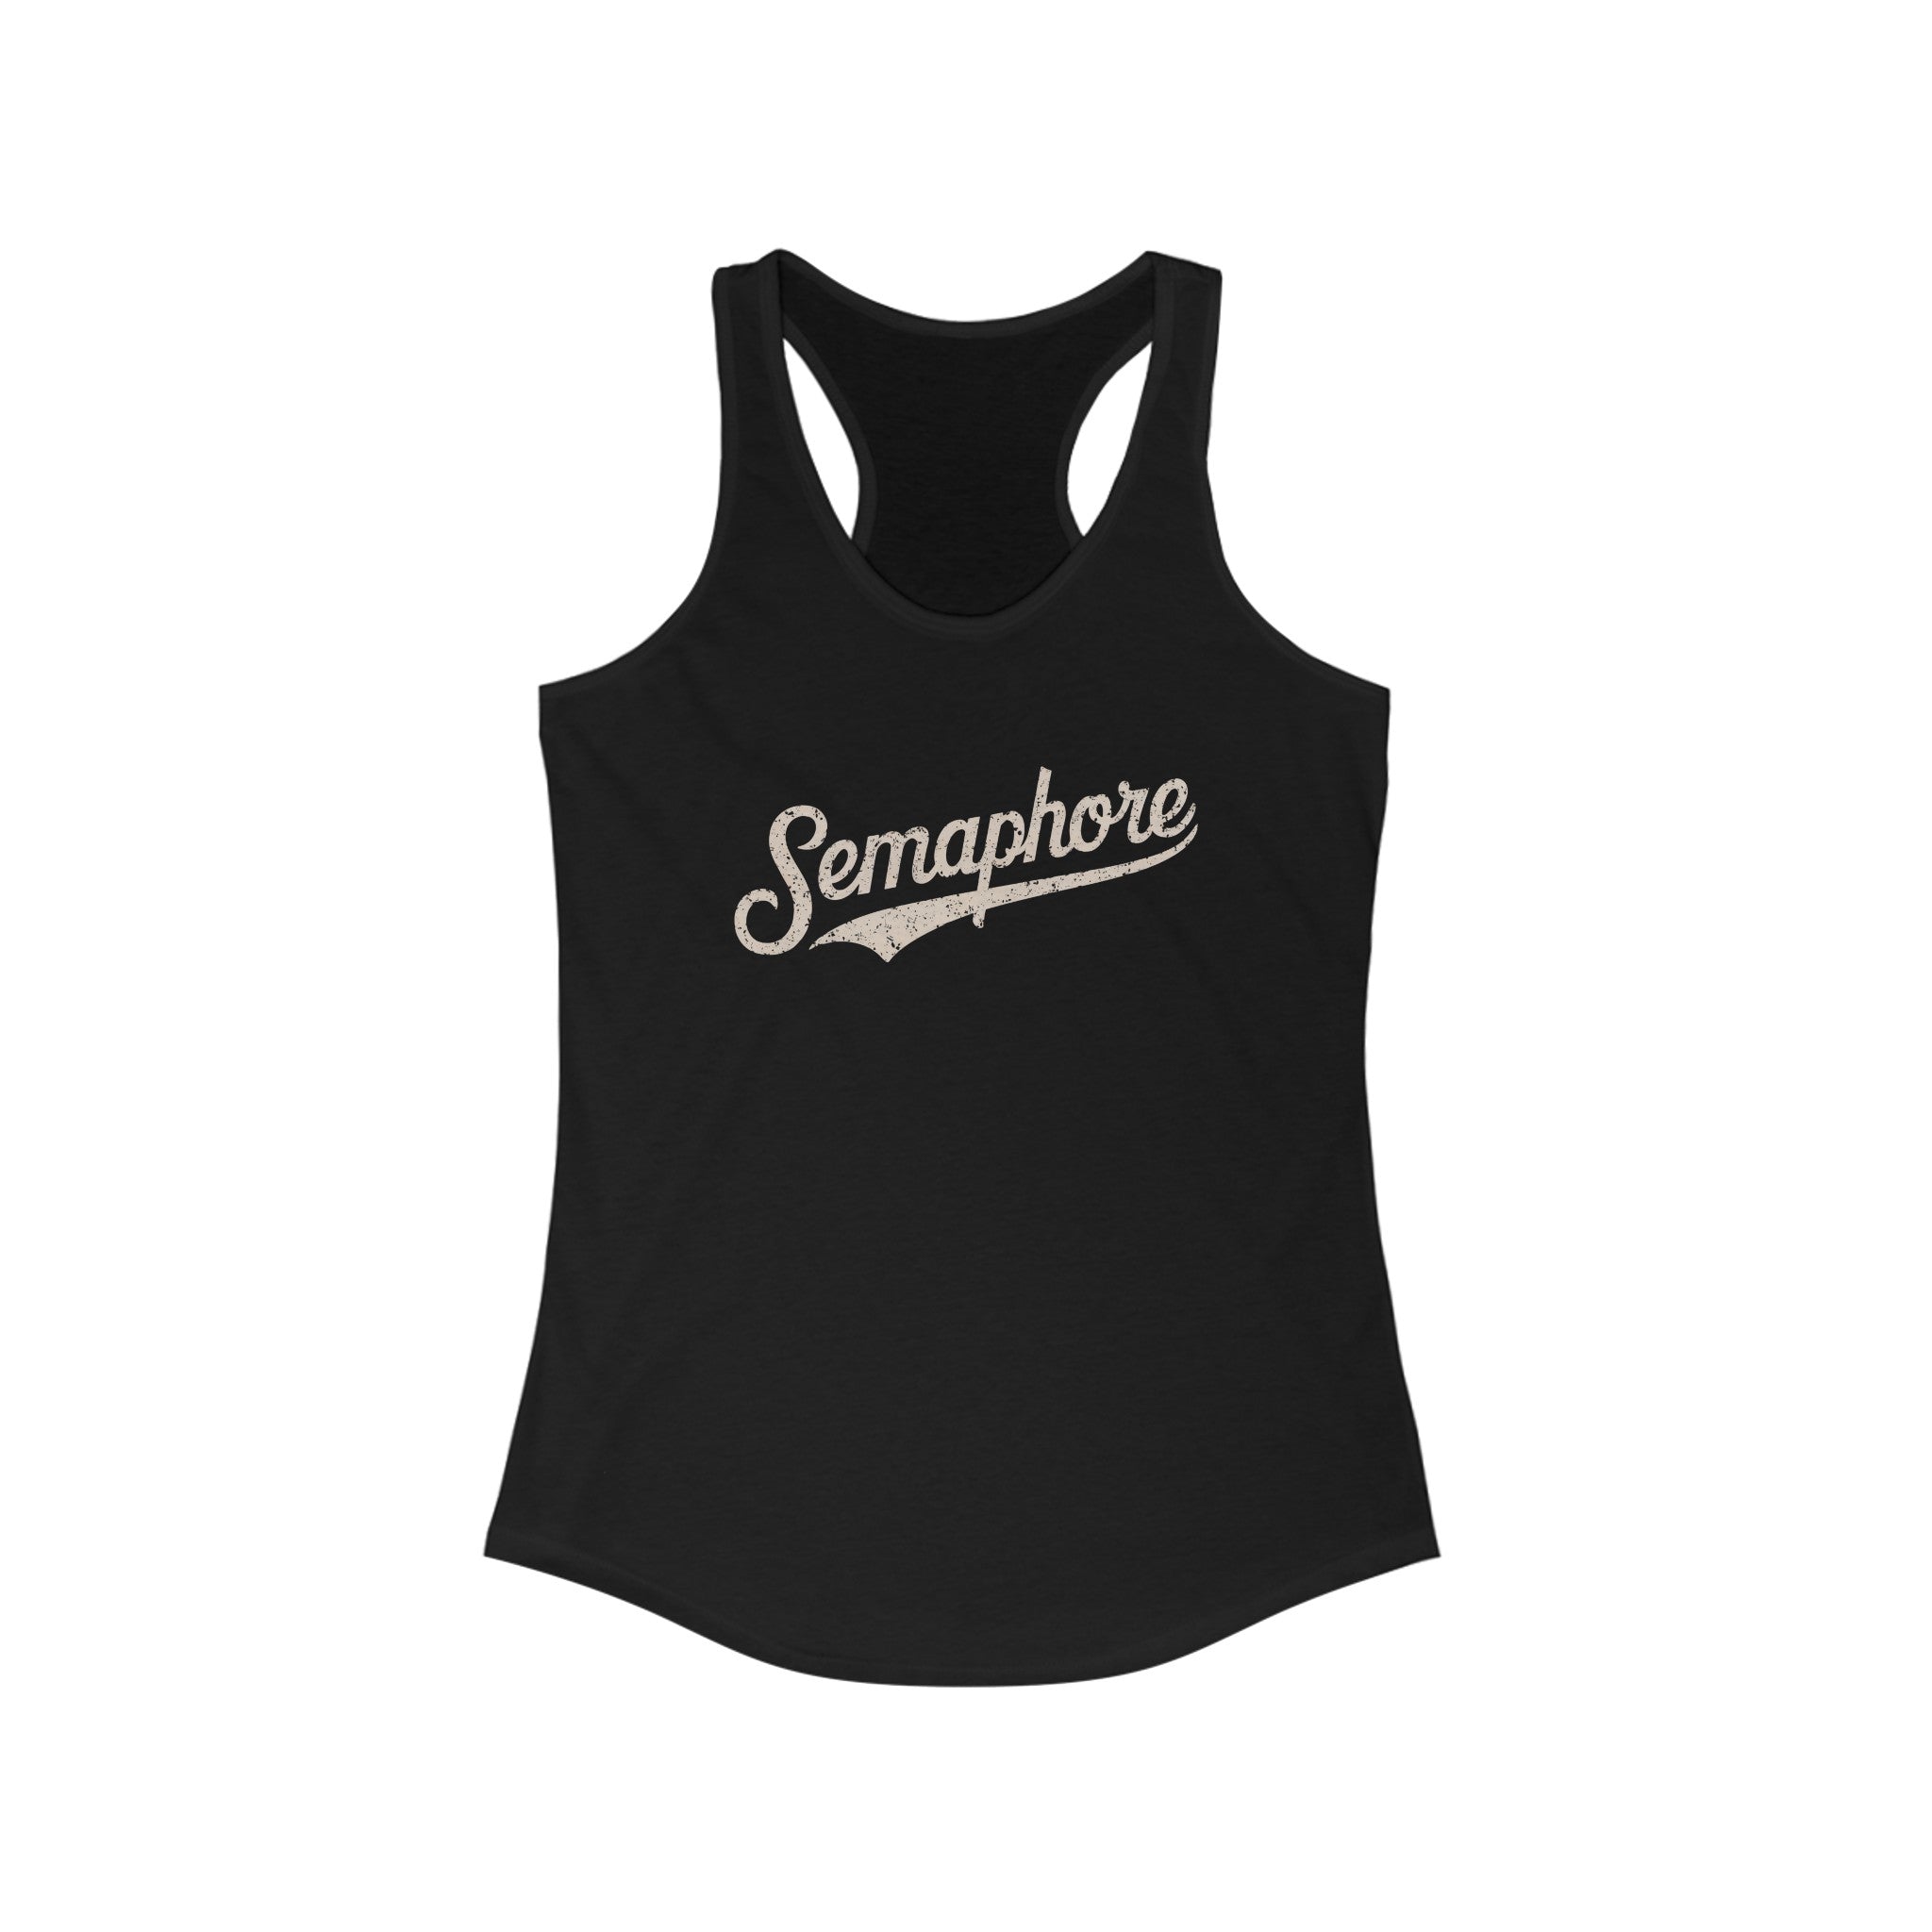 Lightweight black Semaphore - Women's Racerback Tank featuring the word "Semaphore" elegantly printed in a cursive font across the front.